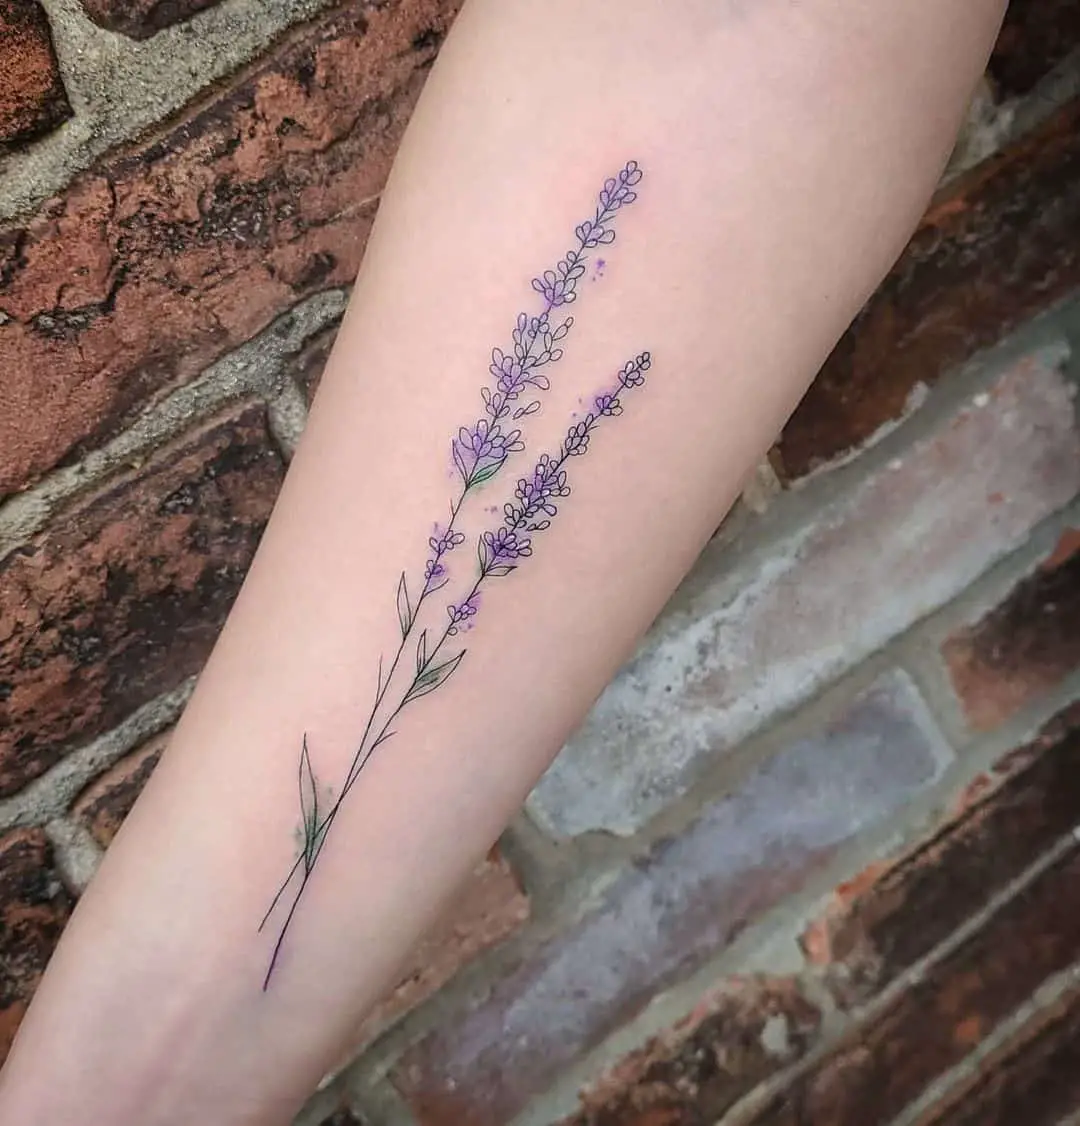 Amazing lavender tattoo on arm by smalltownink libbiealyse